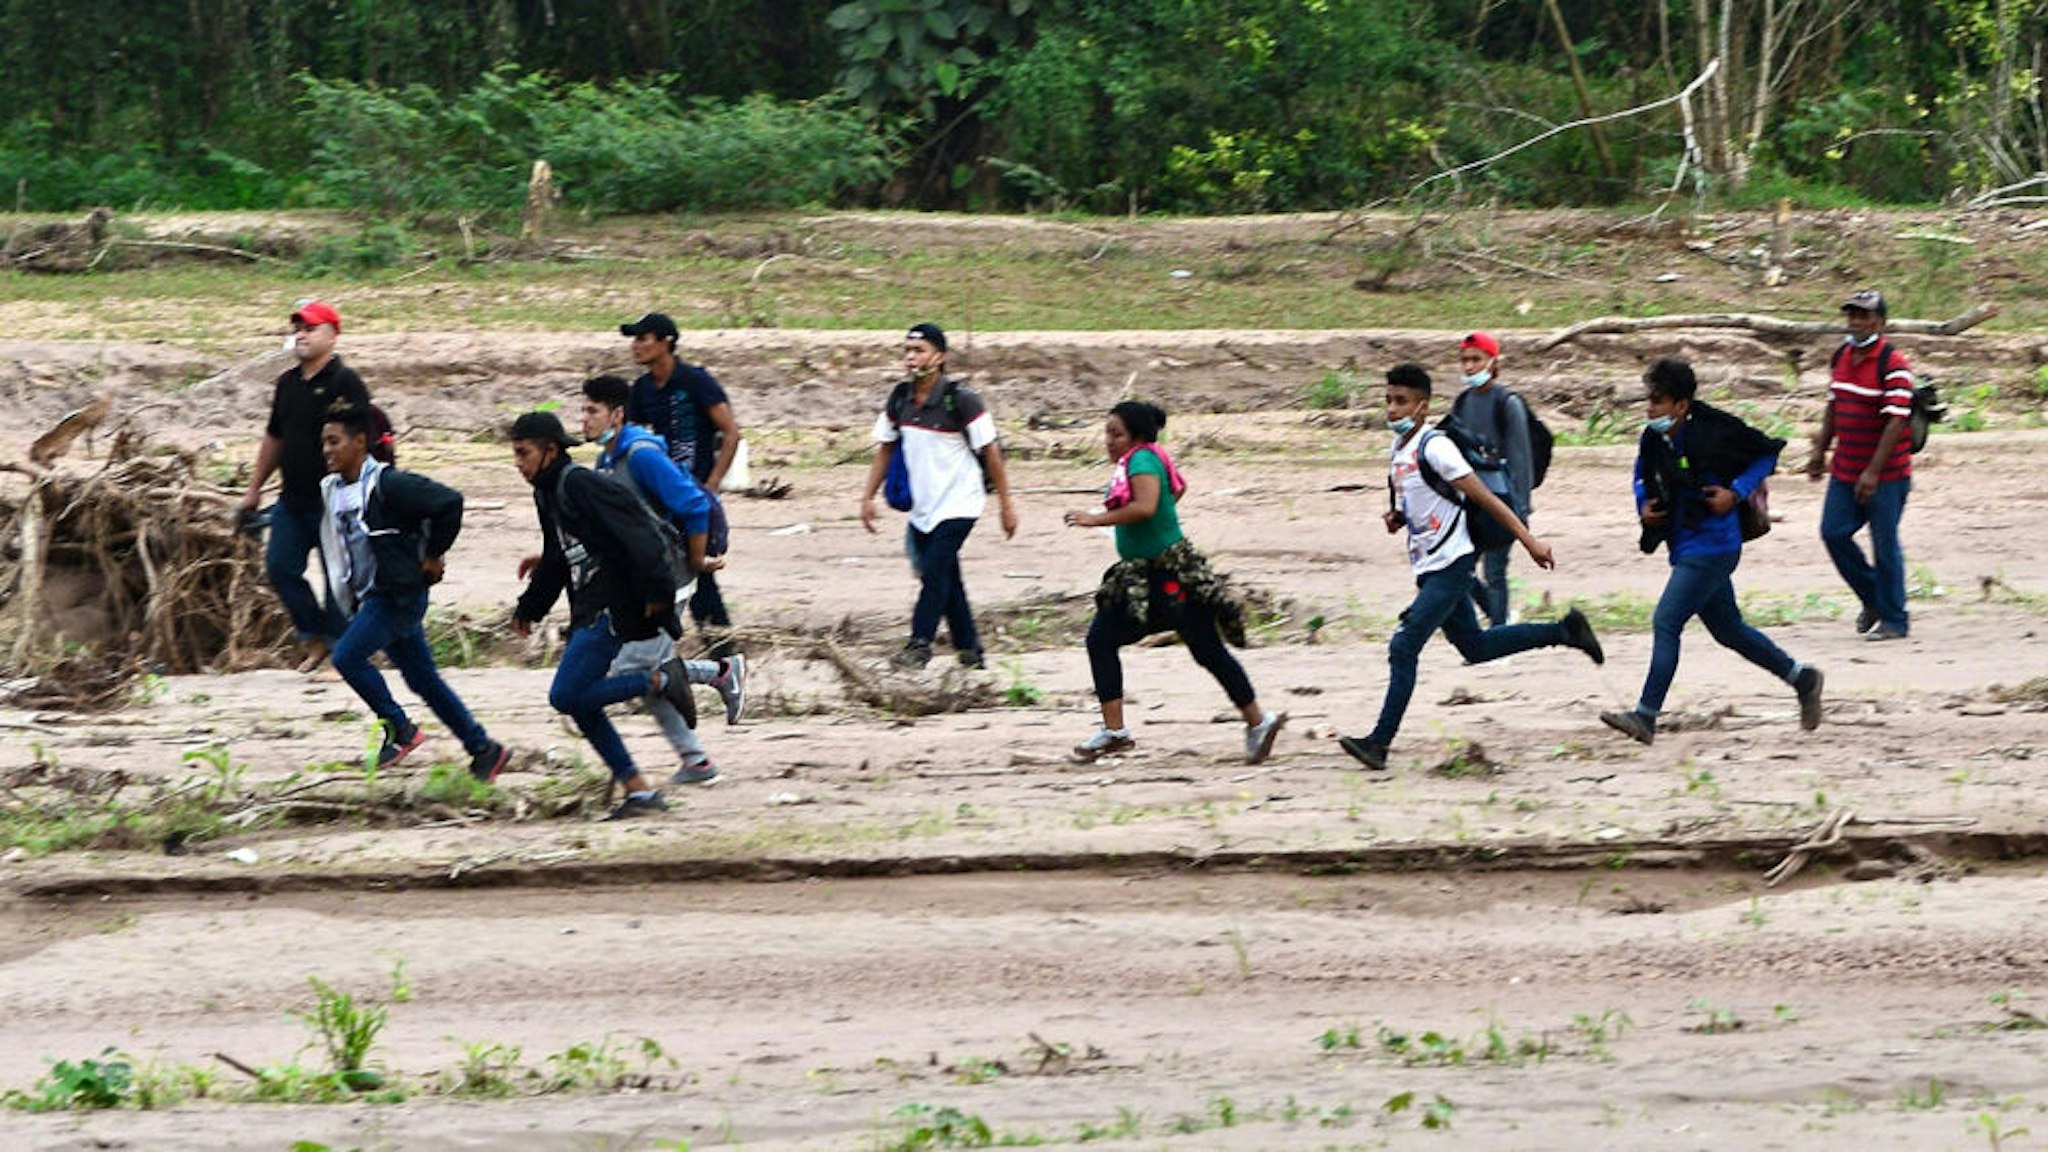 Migrants heading to the border with Guatemala on their way to the United States, cross the dried riverbed of the Copan River in the municipality of Santa Rita, in the Honduran department of Copan, on January 15, 2021. - Hundreds of asylum seekers are forming new migrant caravans in Honduras, planning to walk thousands of kilometers through Central America to the United States via Guatemala and Mexico, in search of a better life under the new administration of President-elect Joe Biden.